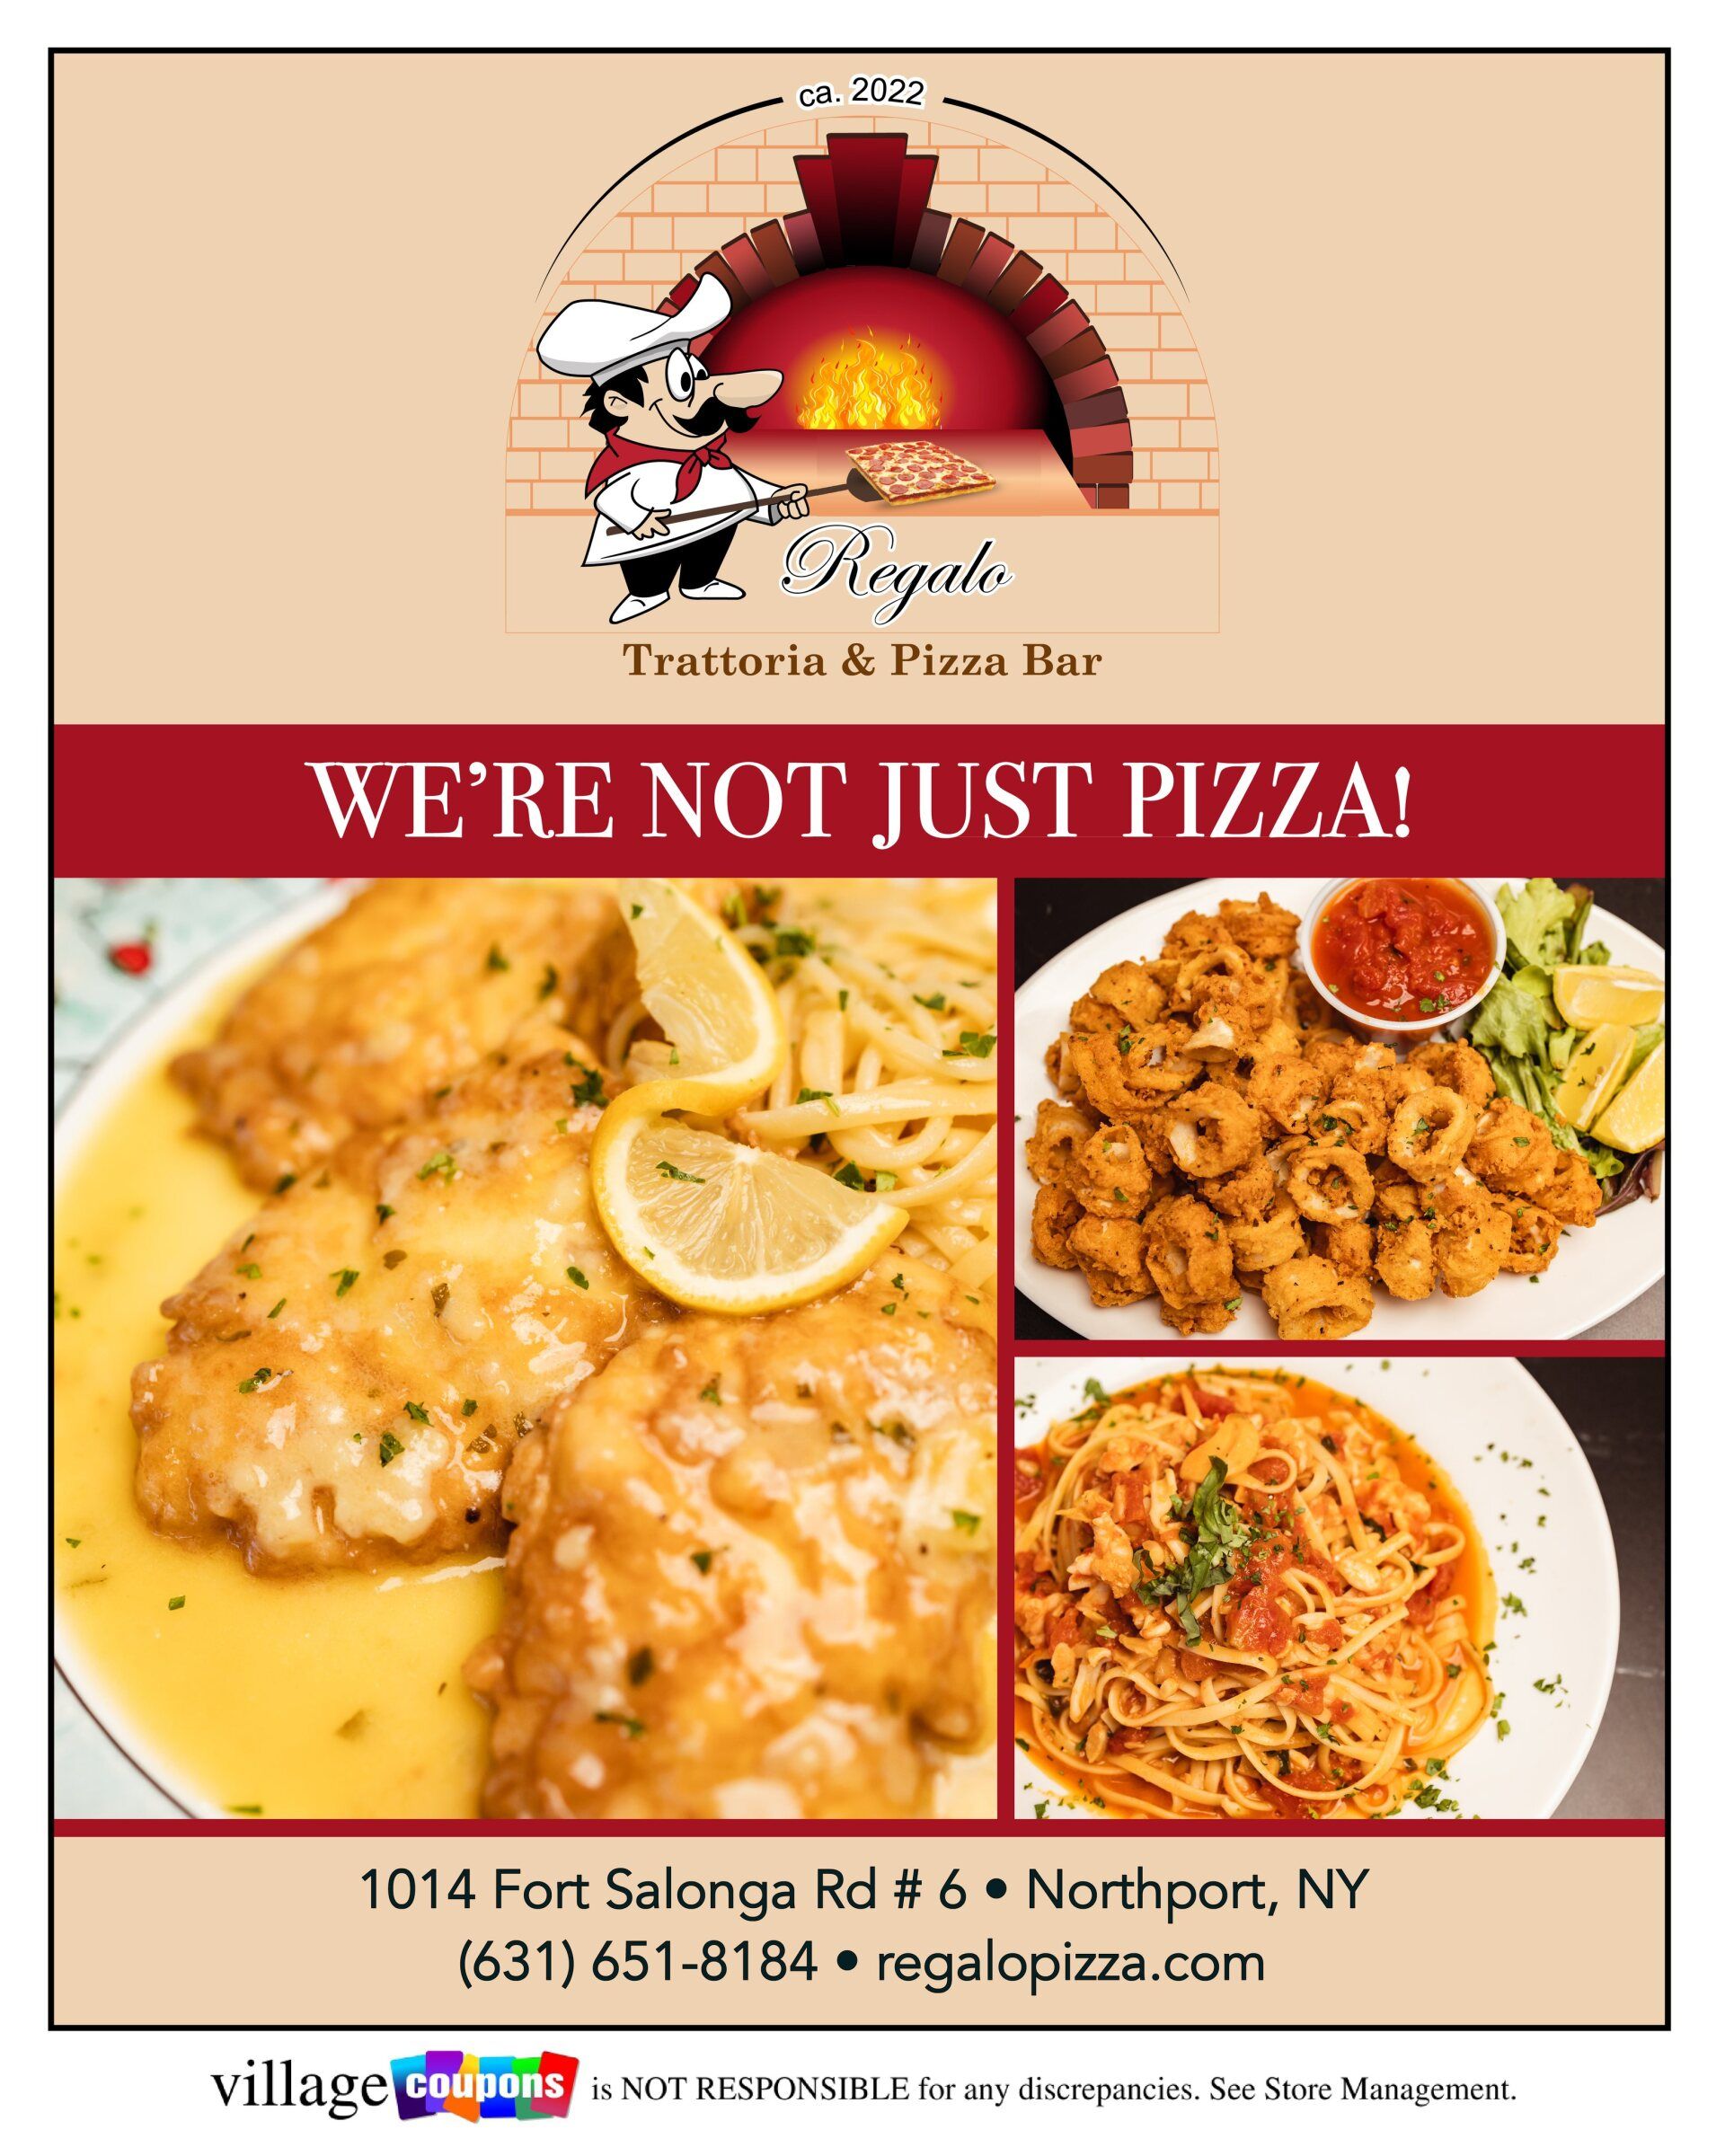 An advertisement for a restaurant that says we 're not just pizza